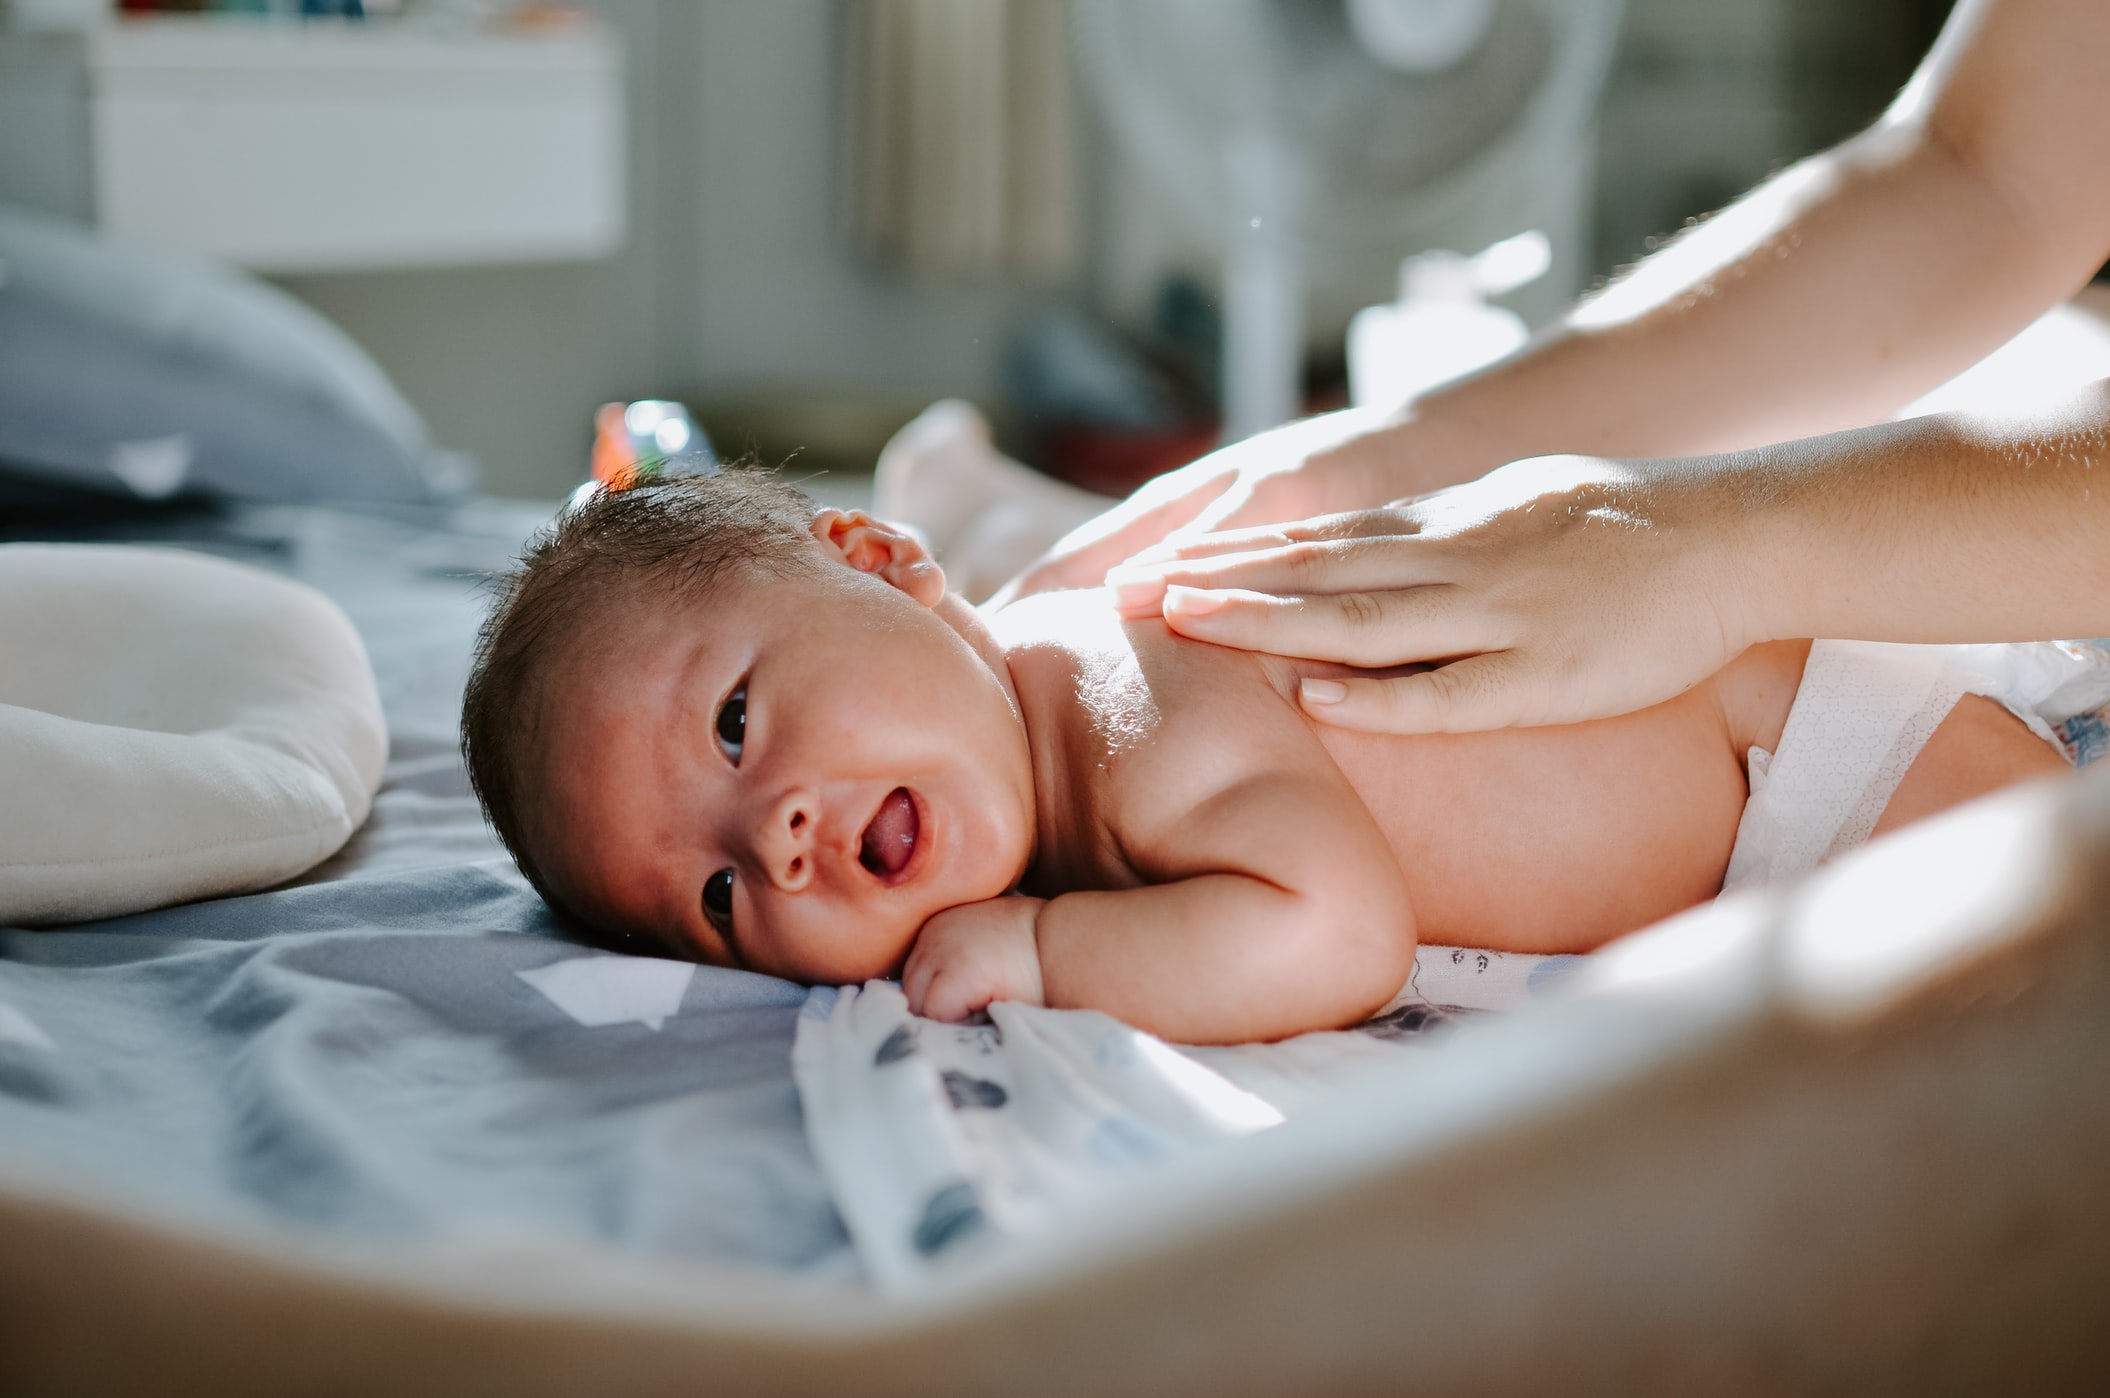 Caring for my baby during COVID19